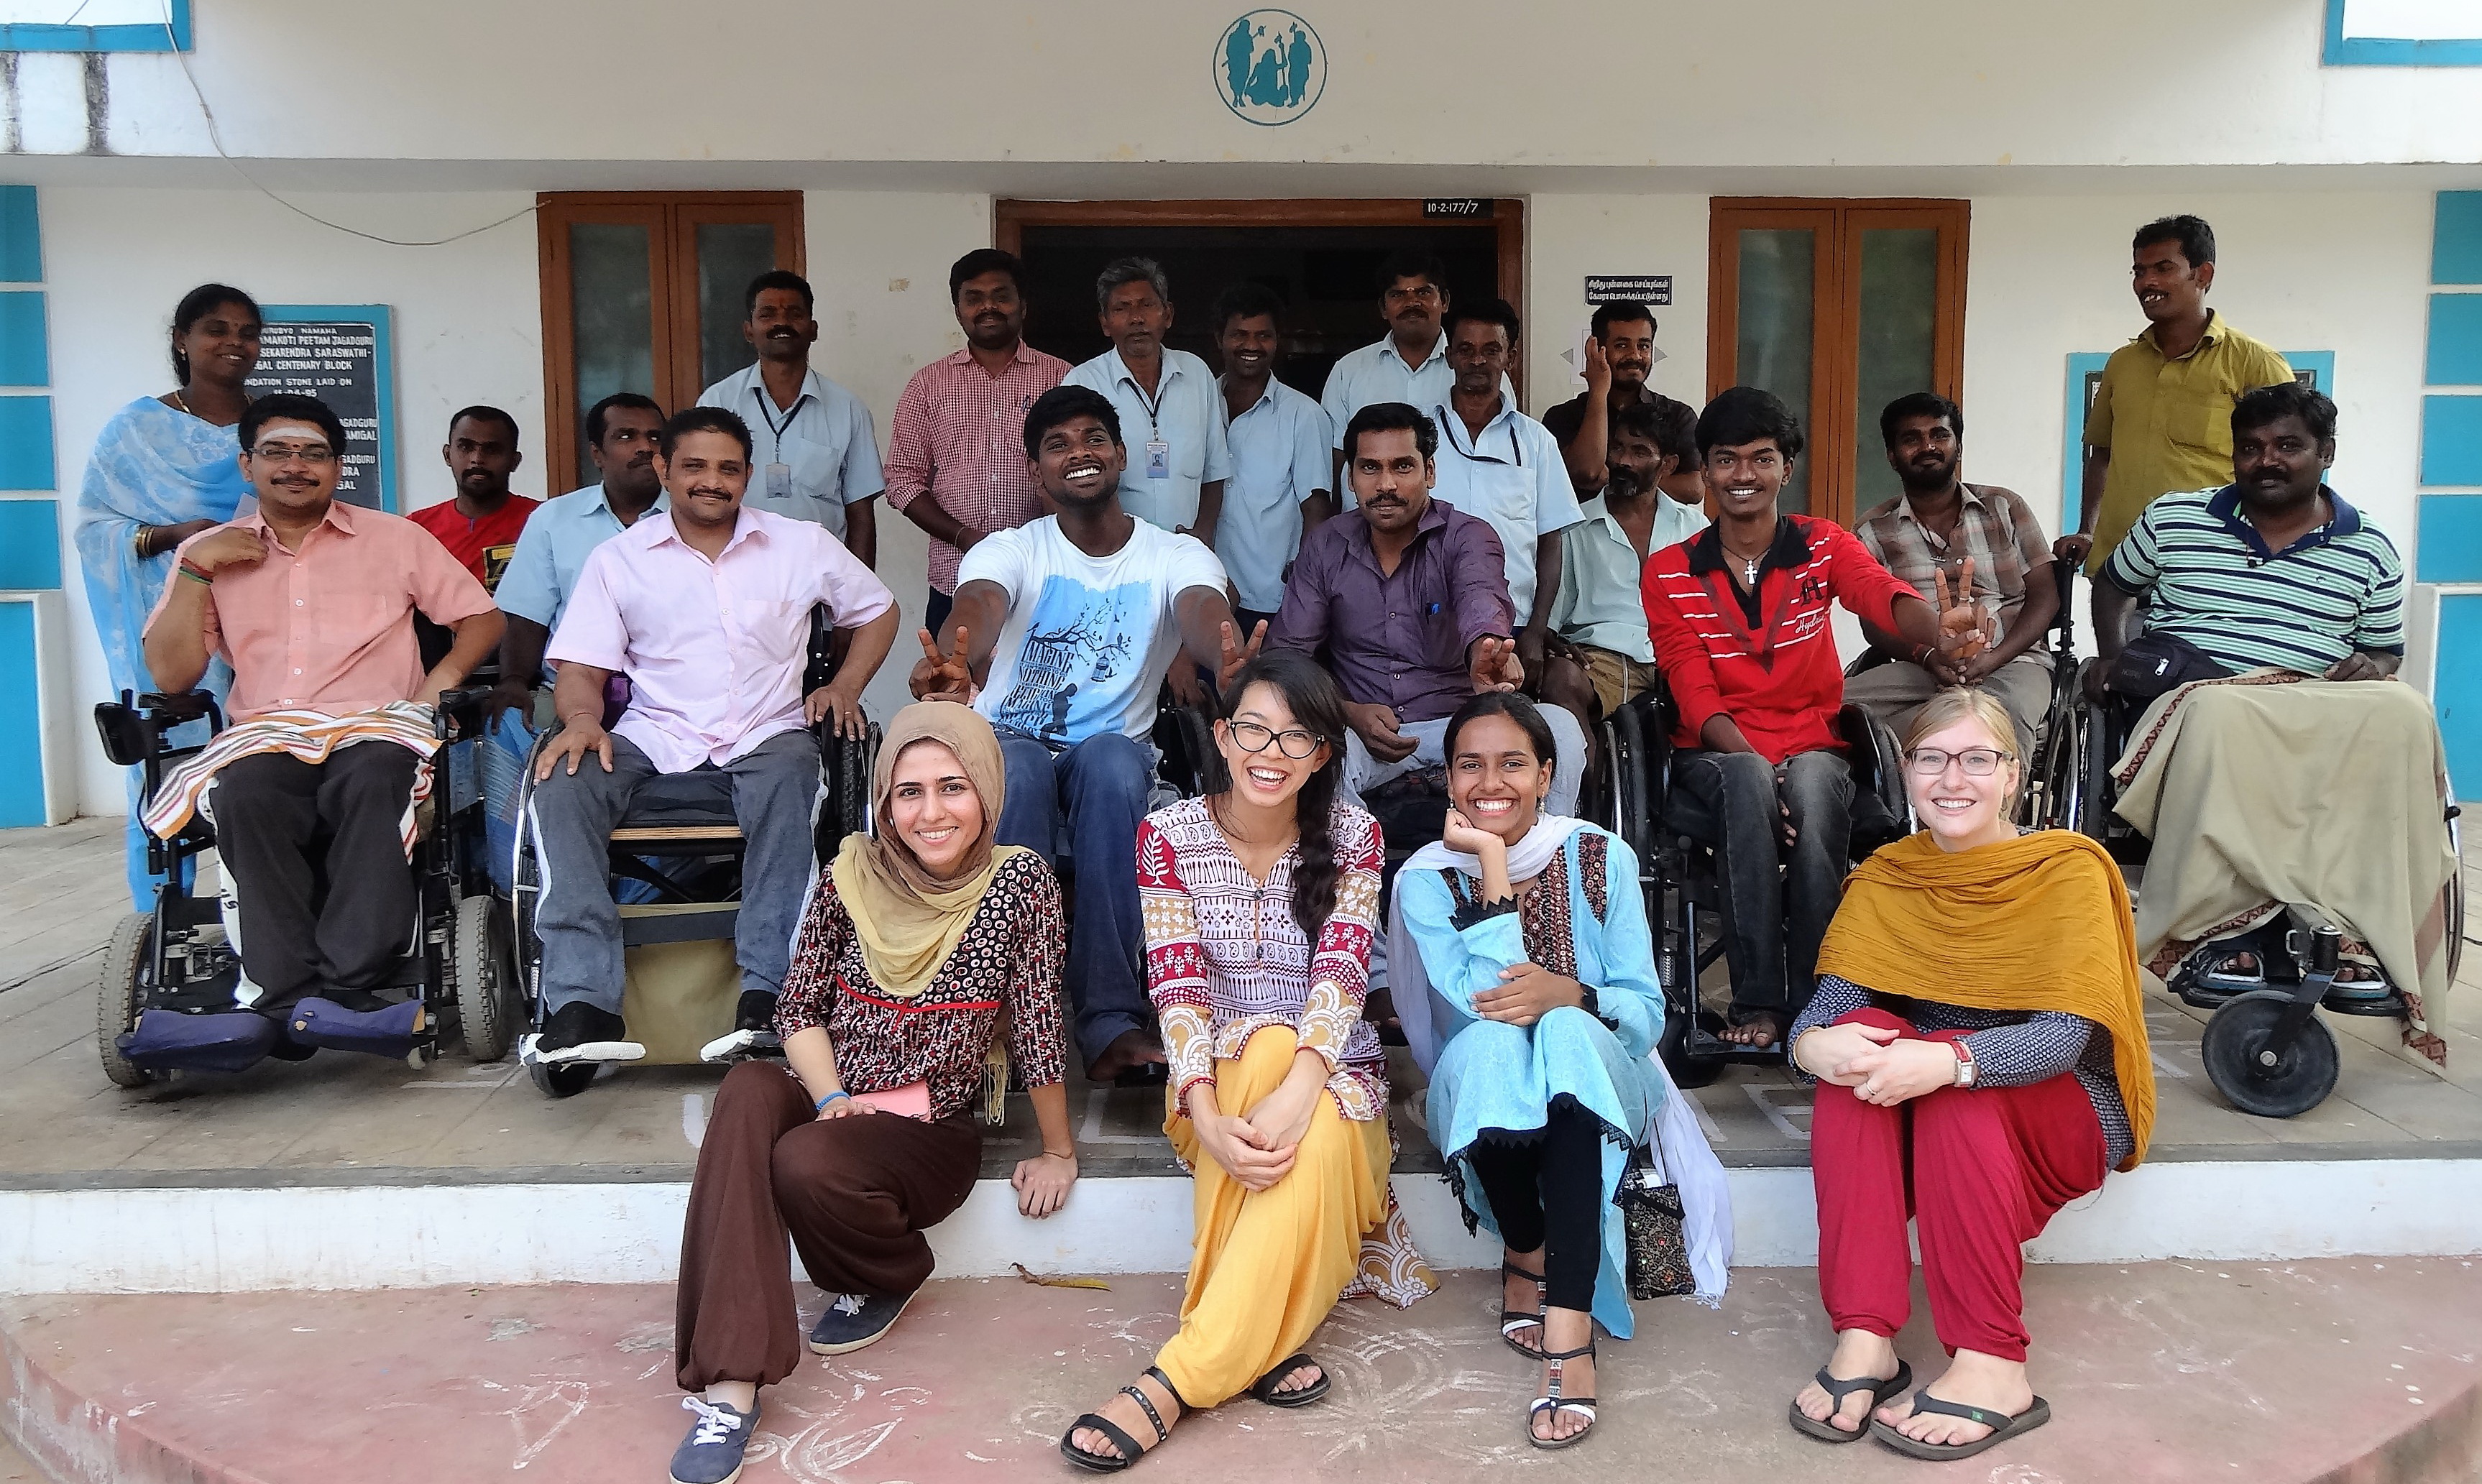 Group of people at seated in front of building in ASSA, Tamil Nadu, India 